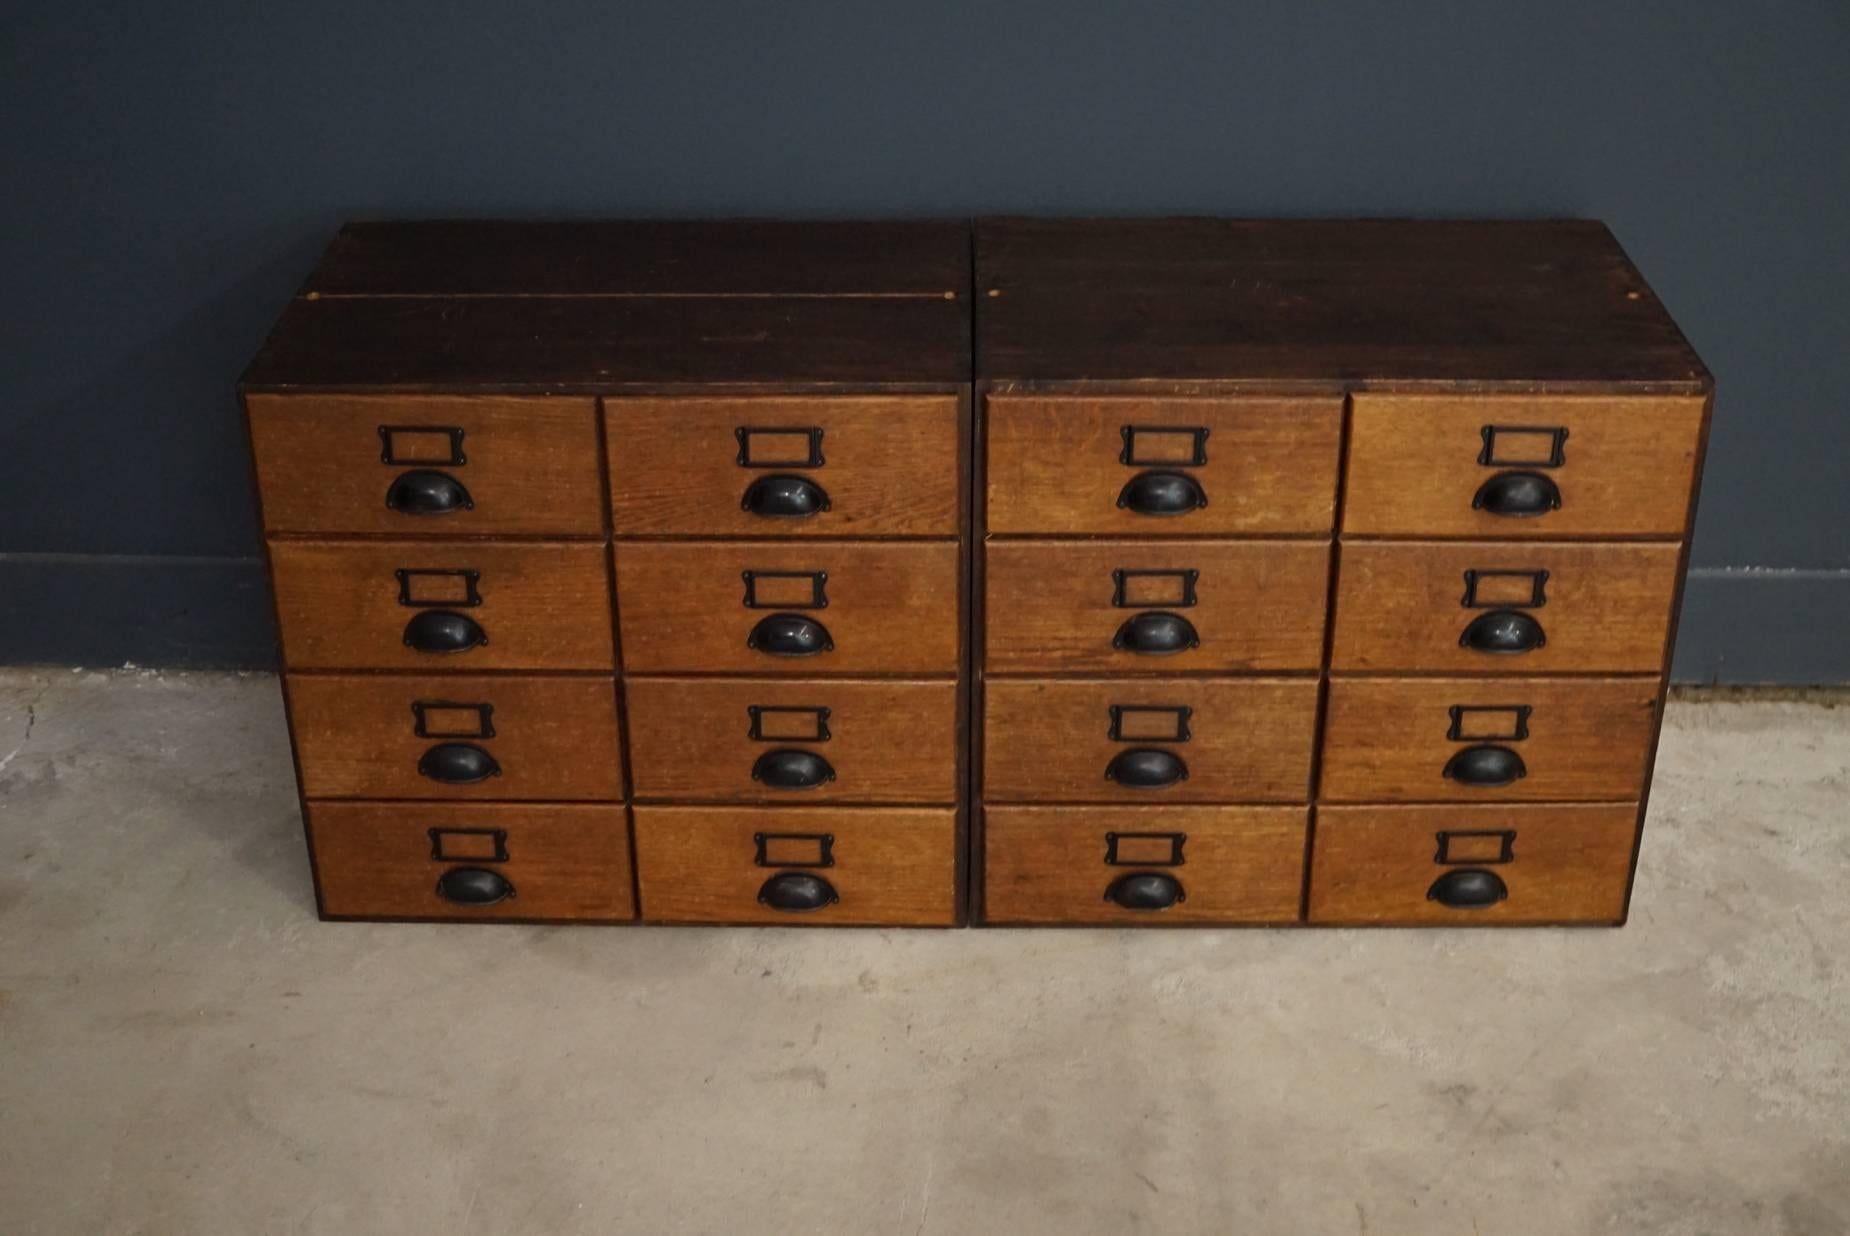 This pair of apothecary cabinets were designed and made, circa 1950s in Germany. The cabinets are made from oak and pine and feature drawers with metal cup handles.